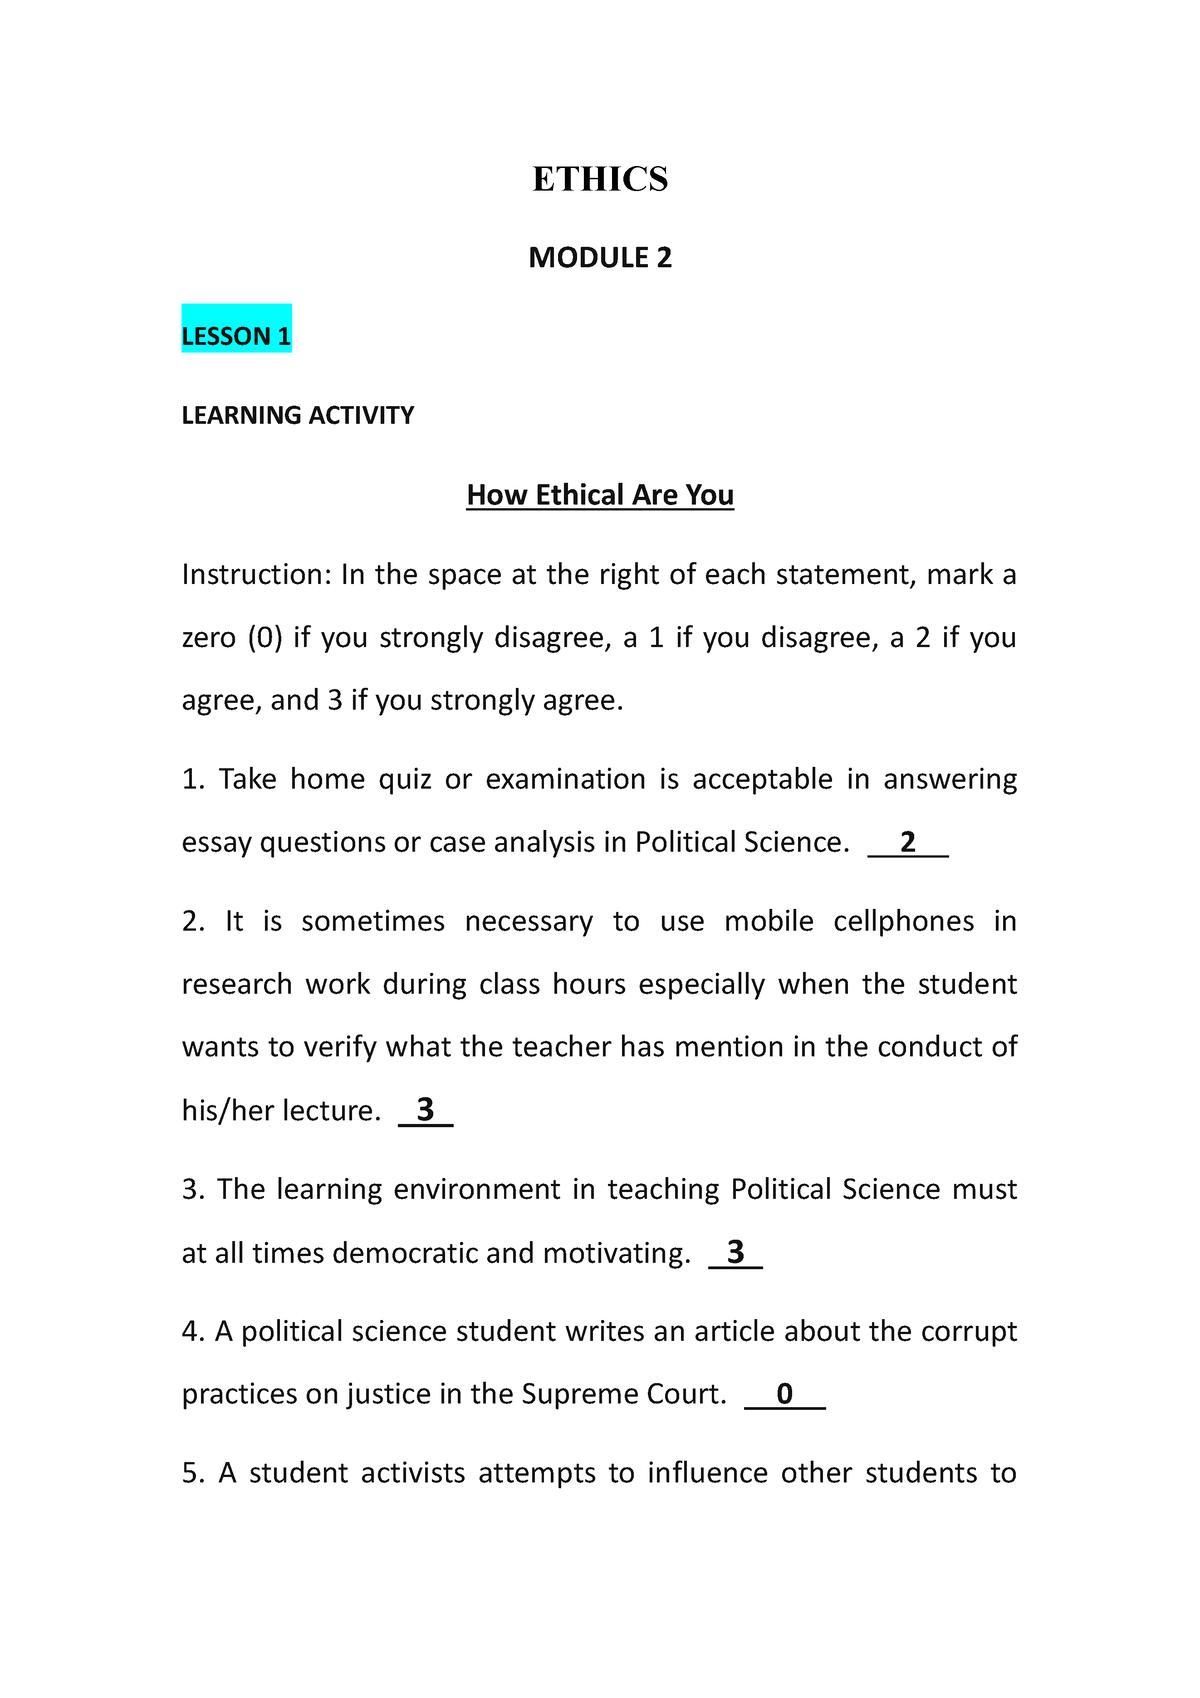 ethics essay questions and answers